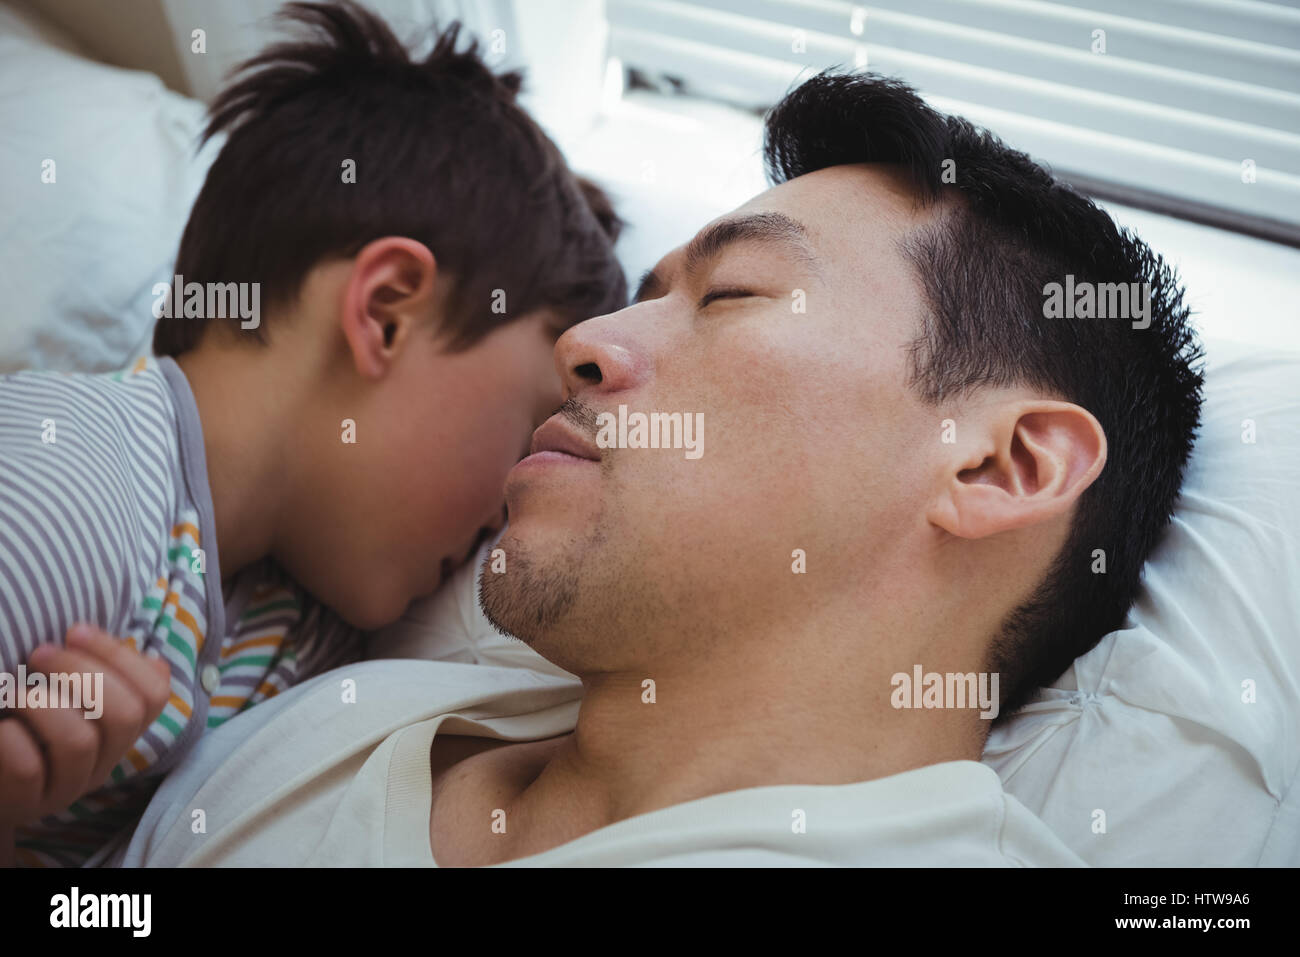 Father and son sleeping together in bedroom Stock Photo